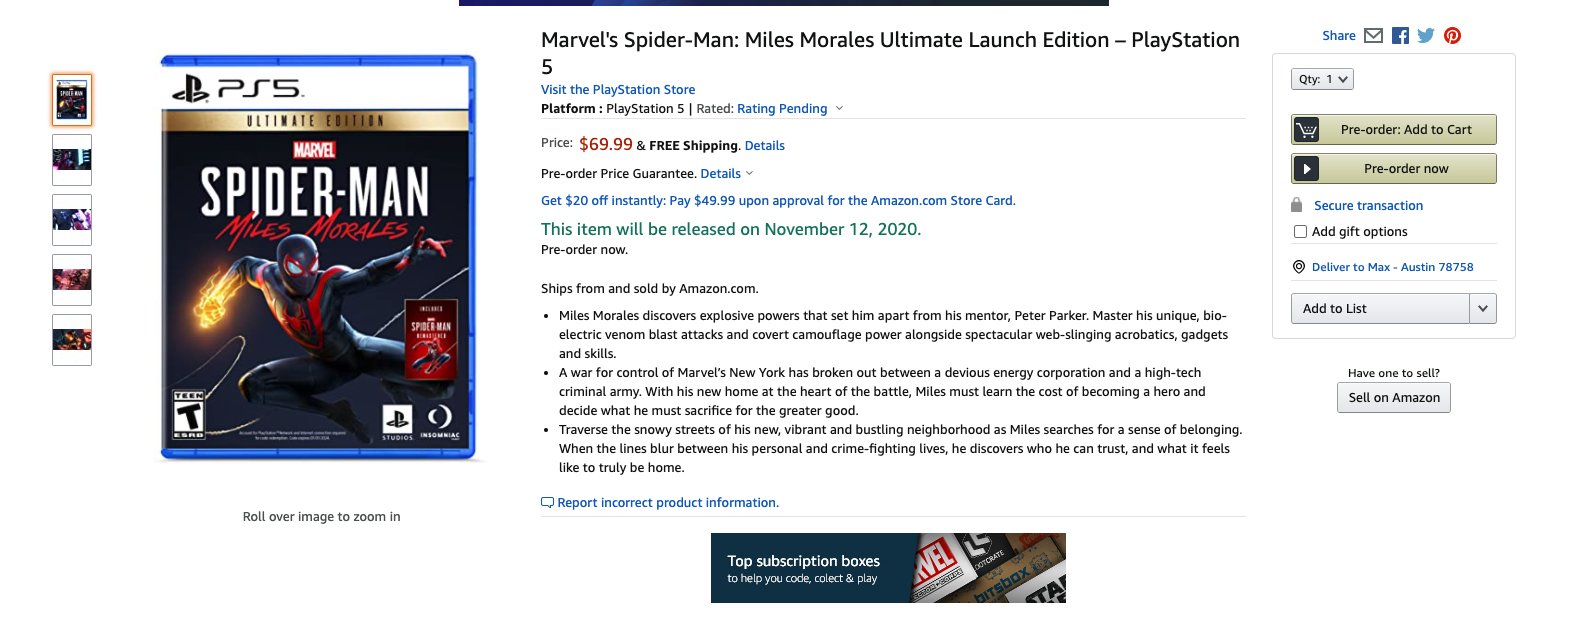 Spider-Man: Miles Morales Launch Edition - PlayStation 5